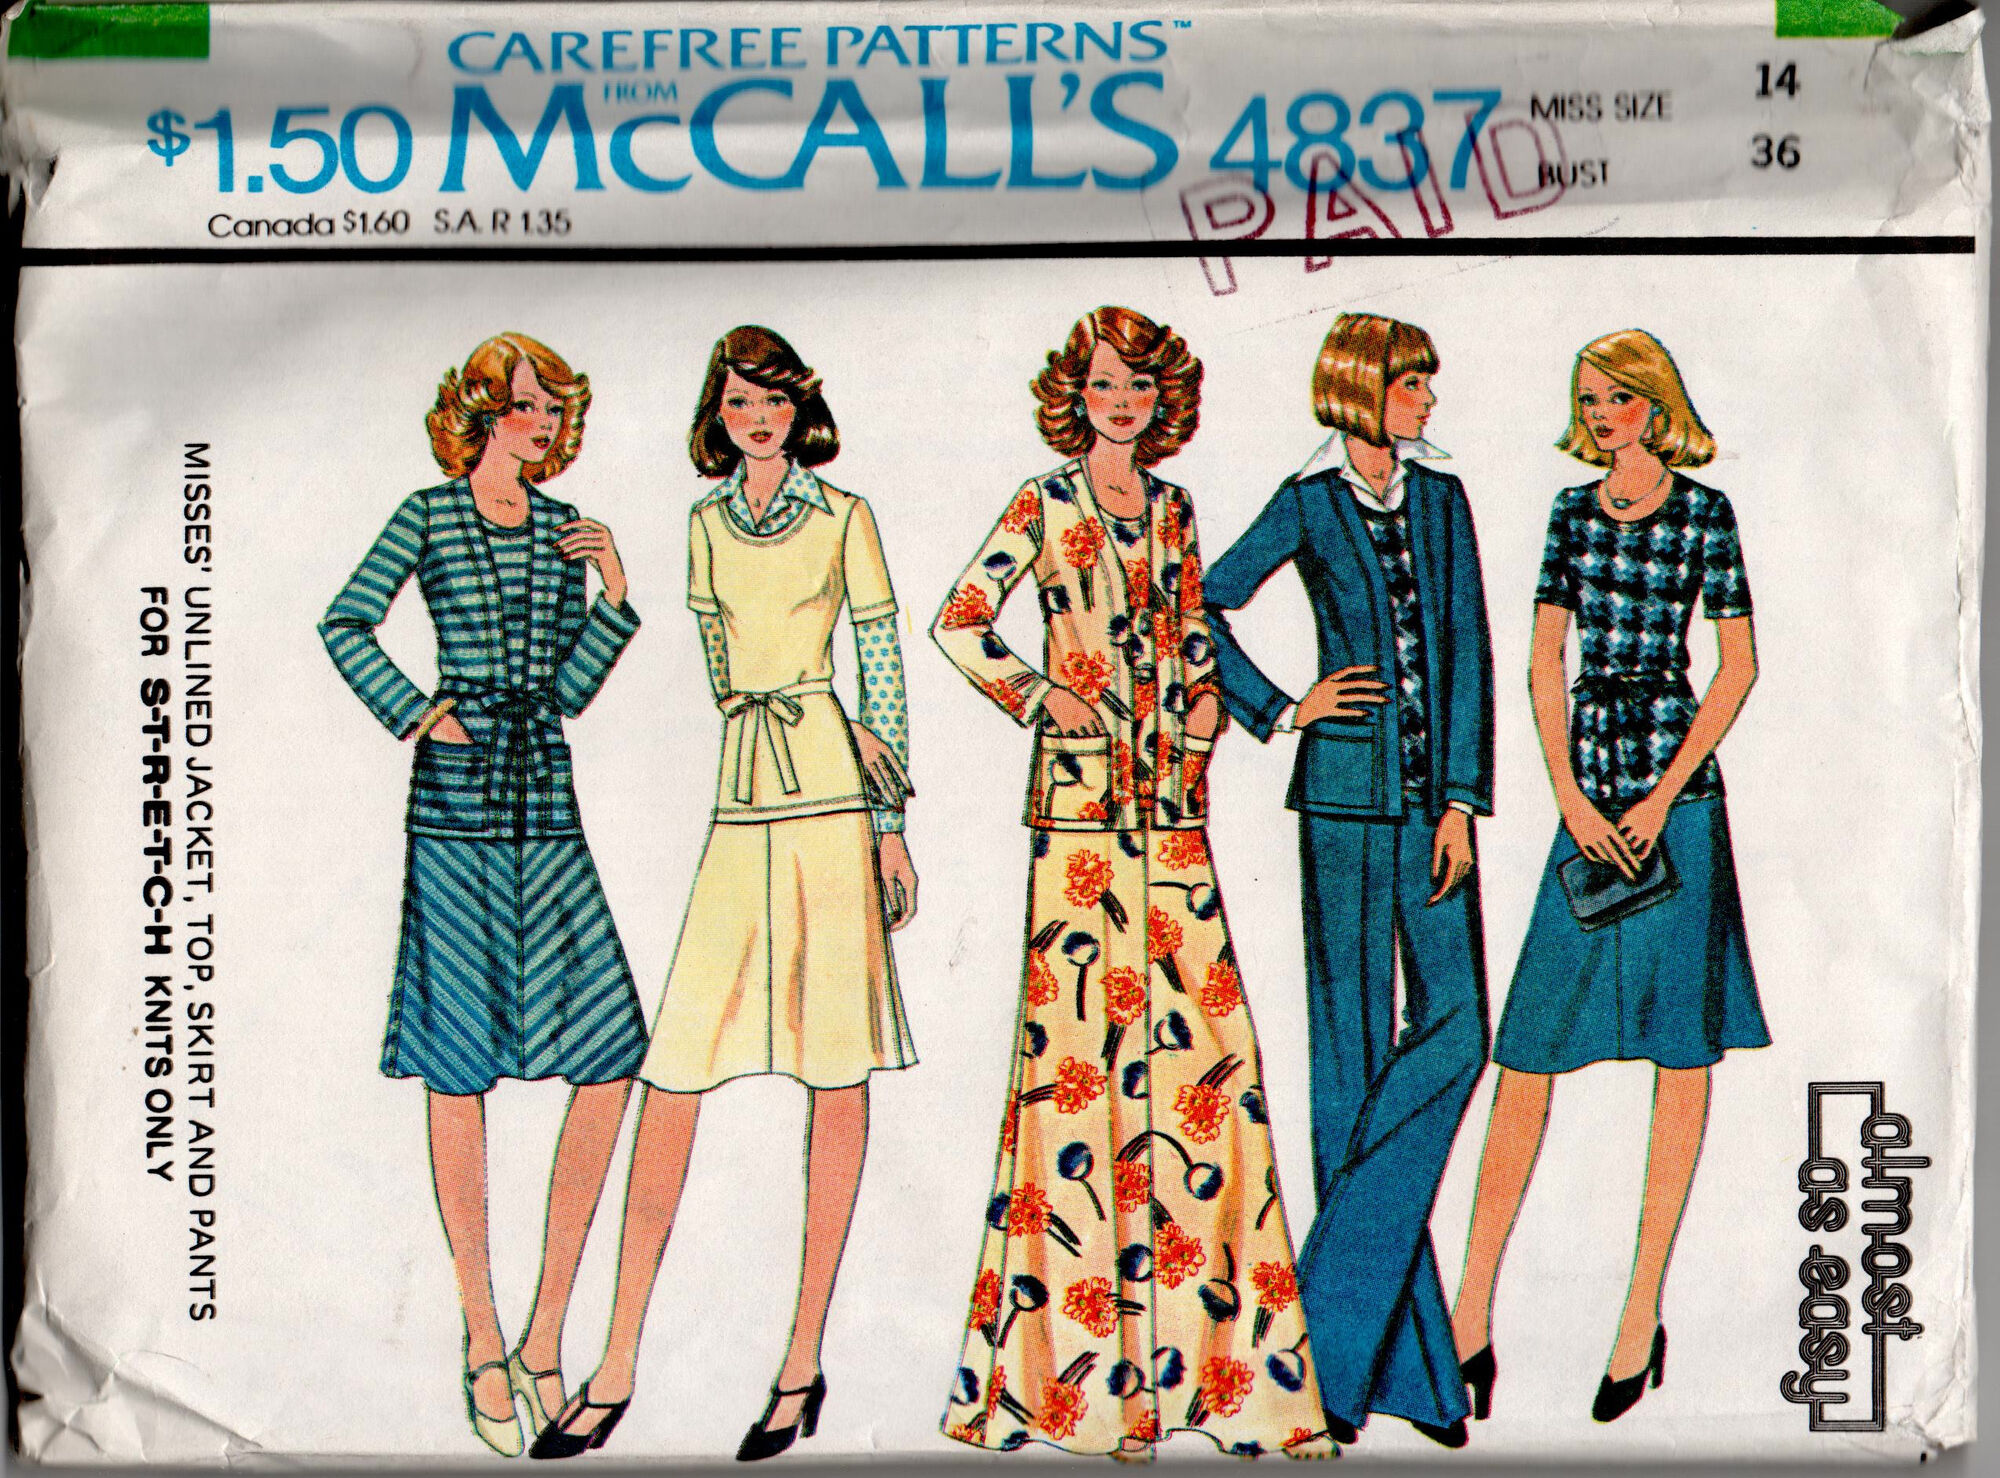 McCall's 4837 | Vintage Sewing Patterns | FANDOM powered by Wikia